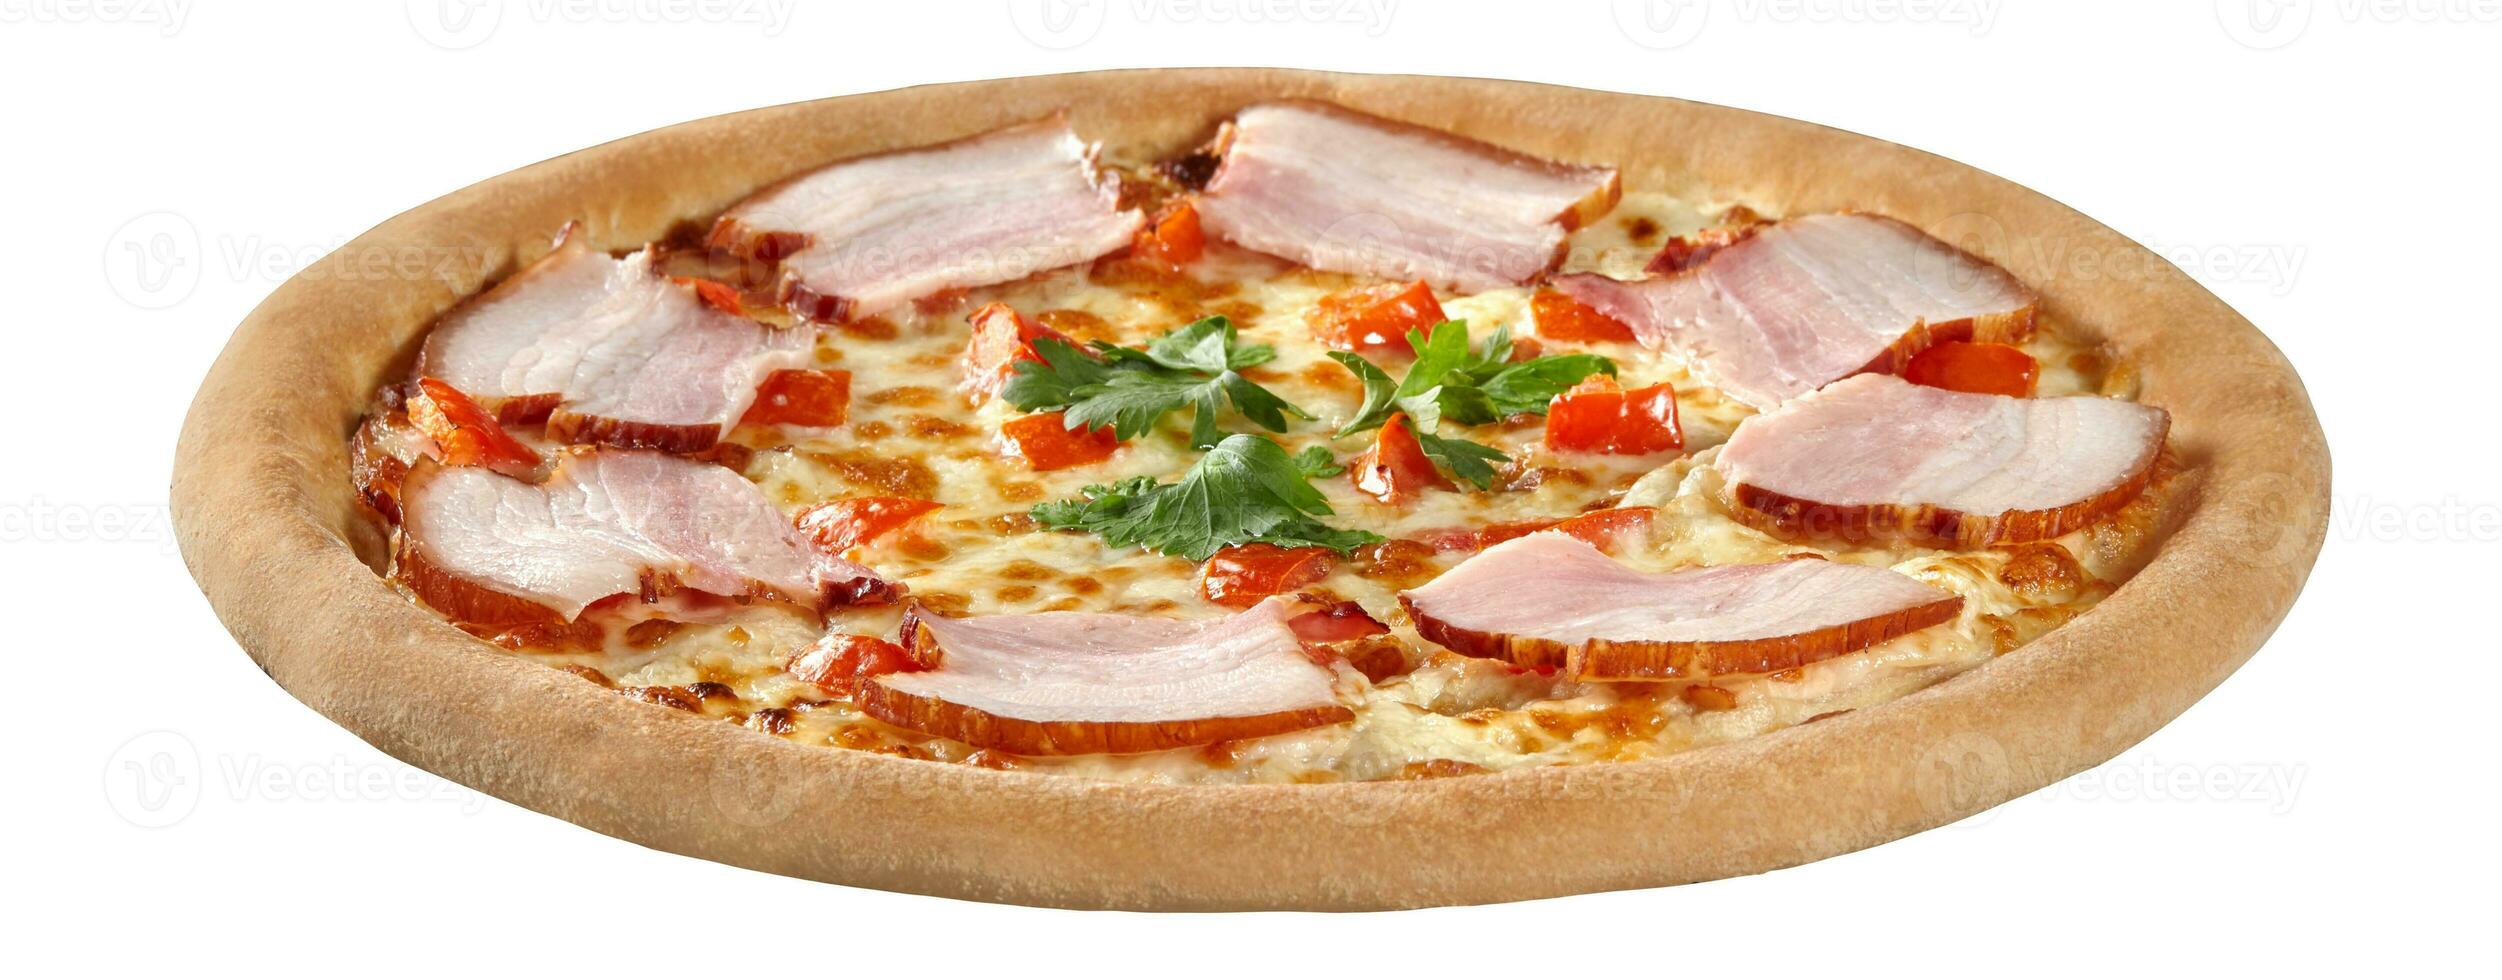 Closeup of pizza with cream cheese sauce, bacon, tomatoes and greens isolated on white photo